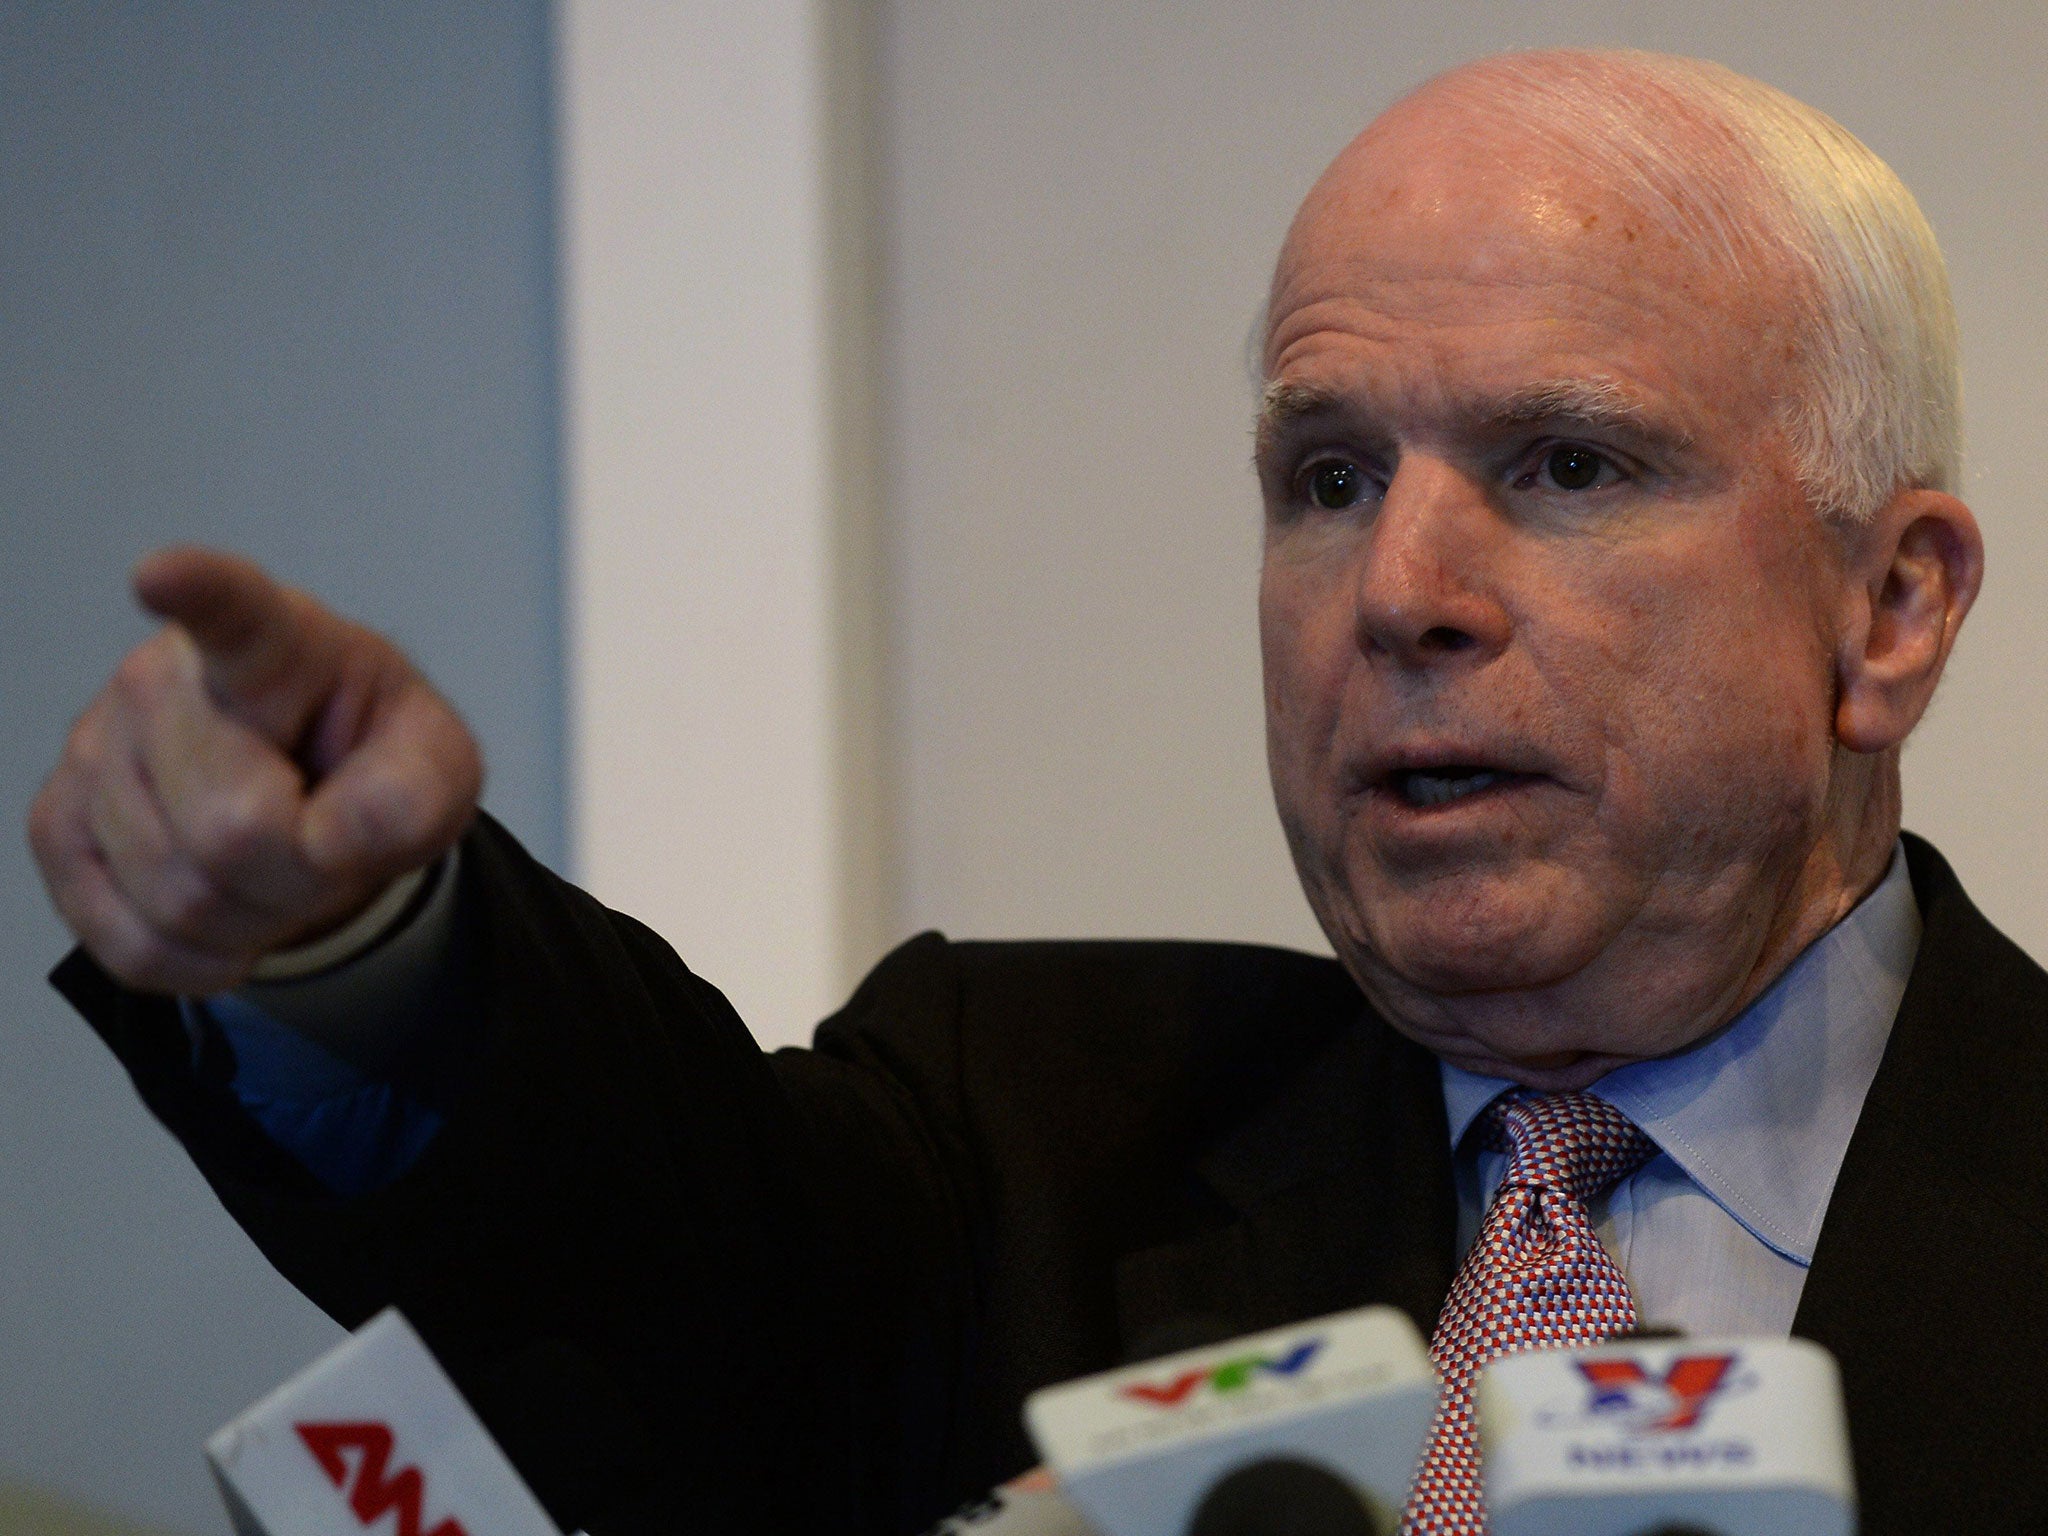 John McCain was caught playing poker on his iPhone